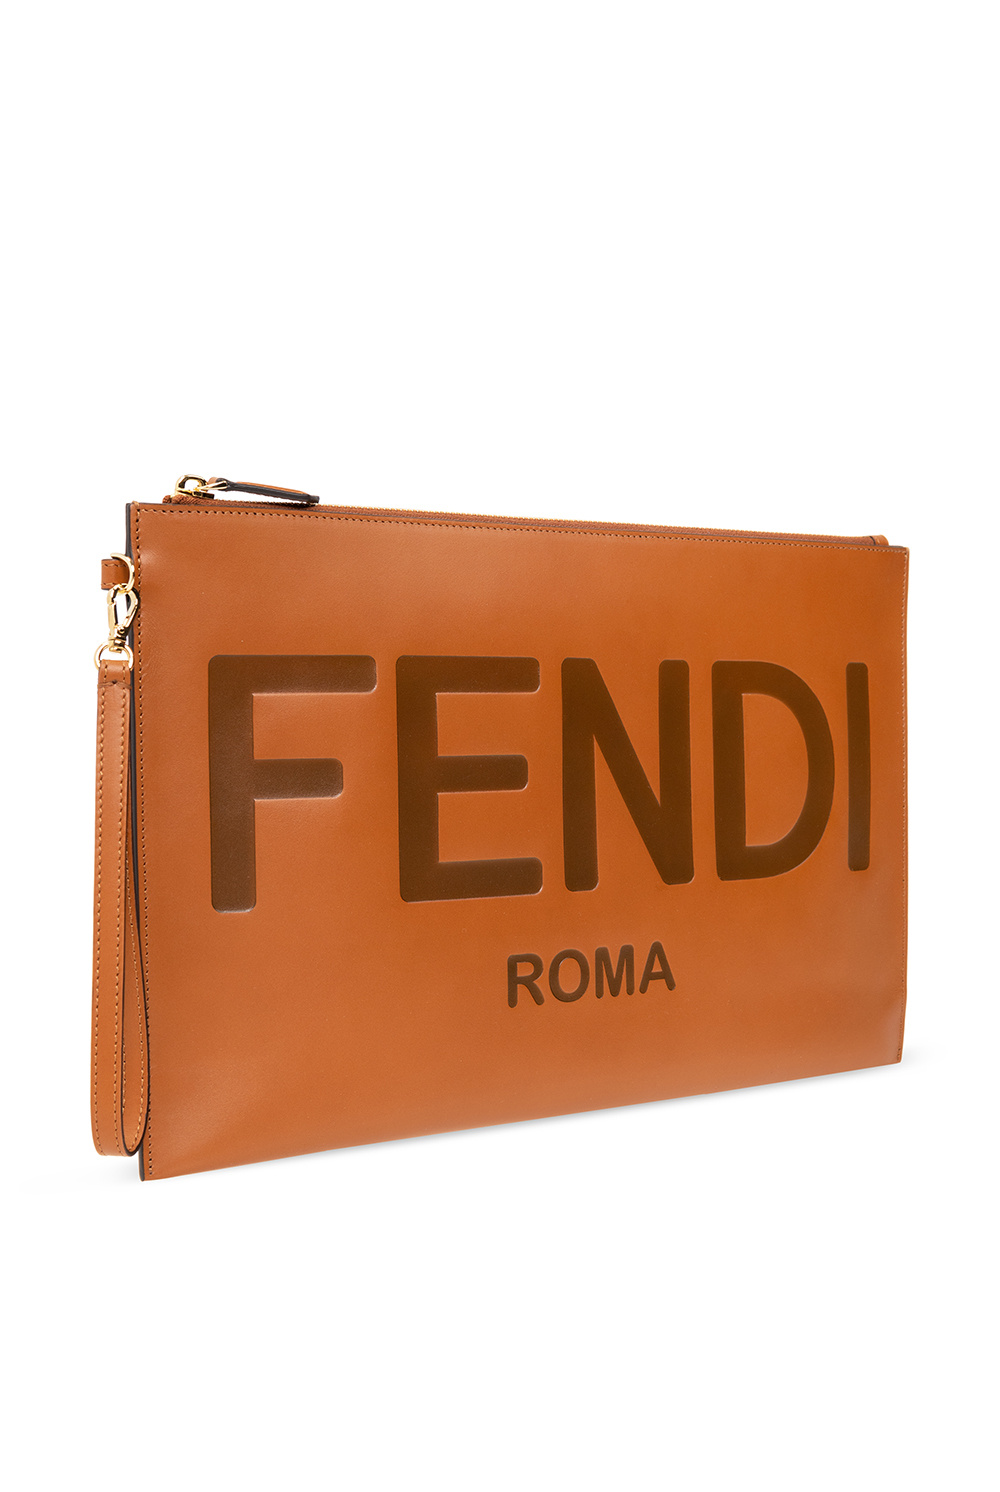 fendi milan Leather pouch with logo